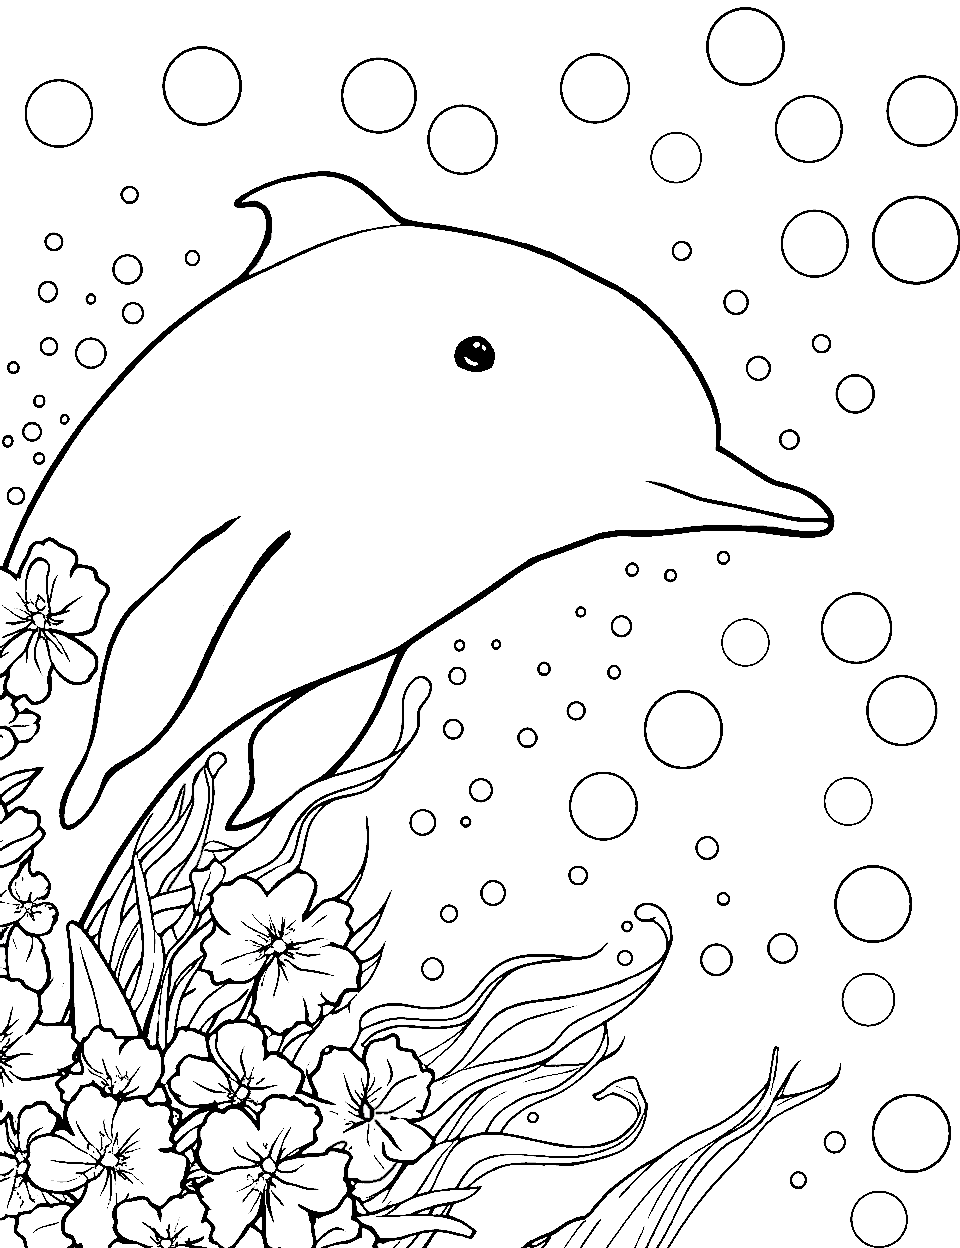 Dolphin Amidst Ocean Flowers Coloring Page - A dolphin gently swimming through delicate ocean flowers.